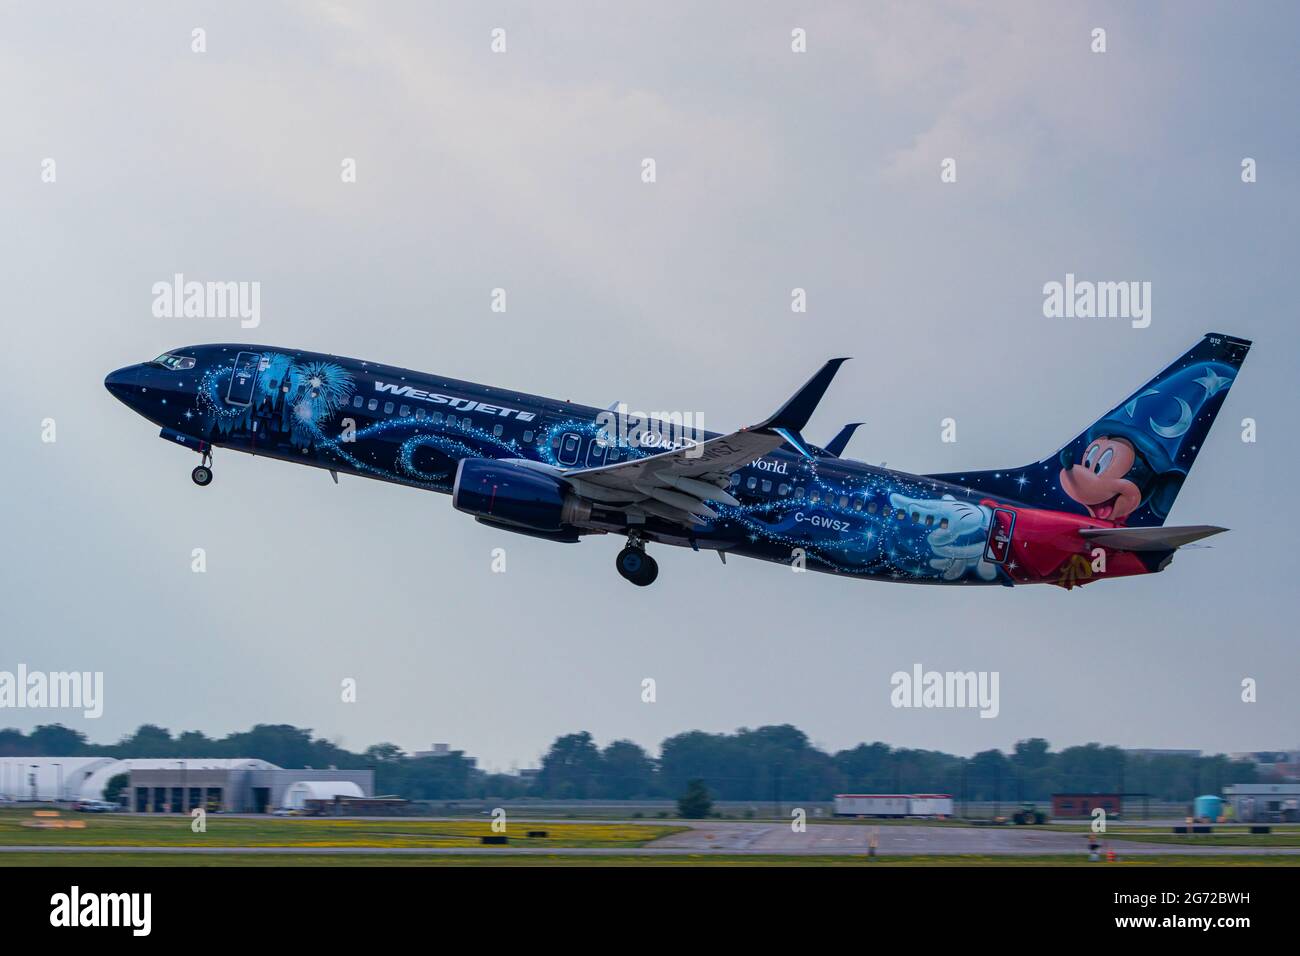 Montreal, Quebec, Canada - 07 07 2021: Westjet's Walt Disney World livery on their 737-8CT taking off from Montreal. Registration C-GWSZ Stock Photo